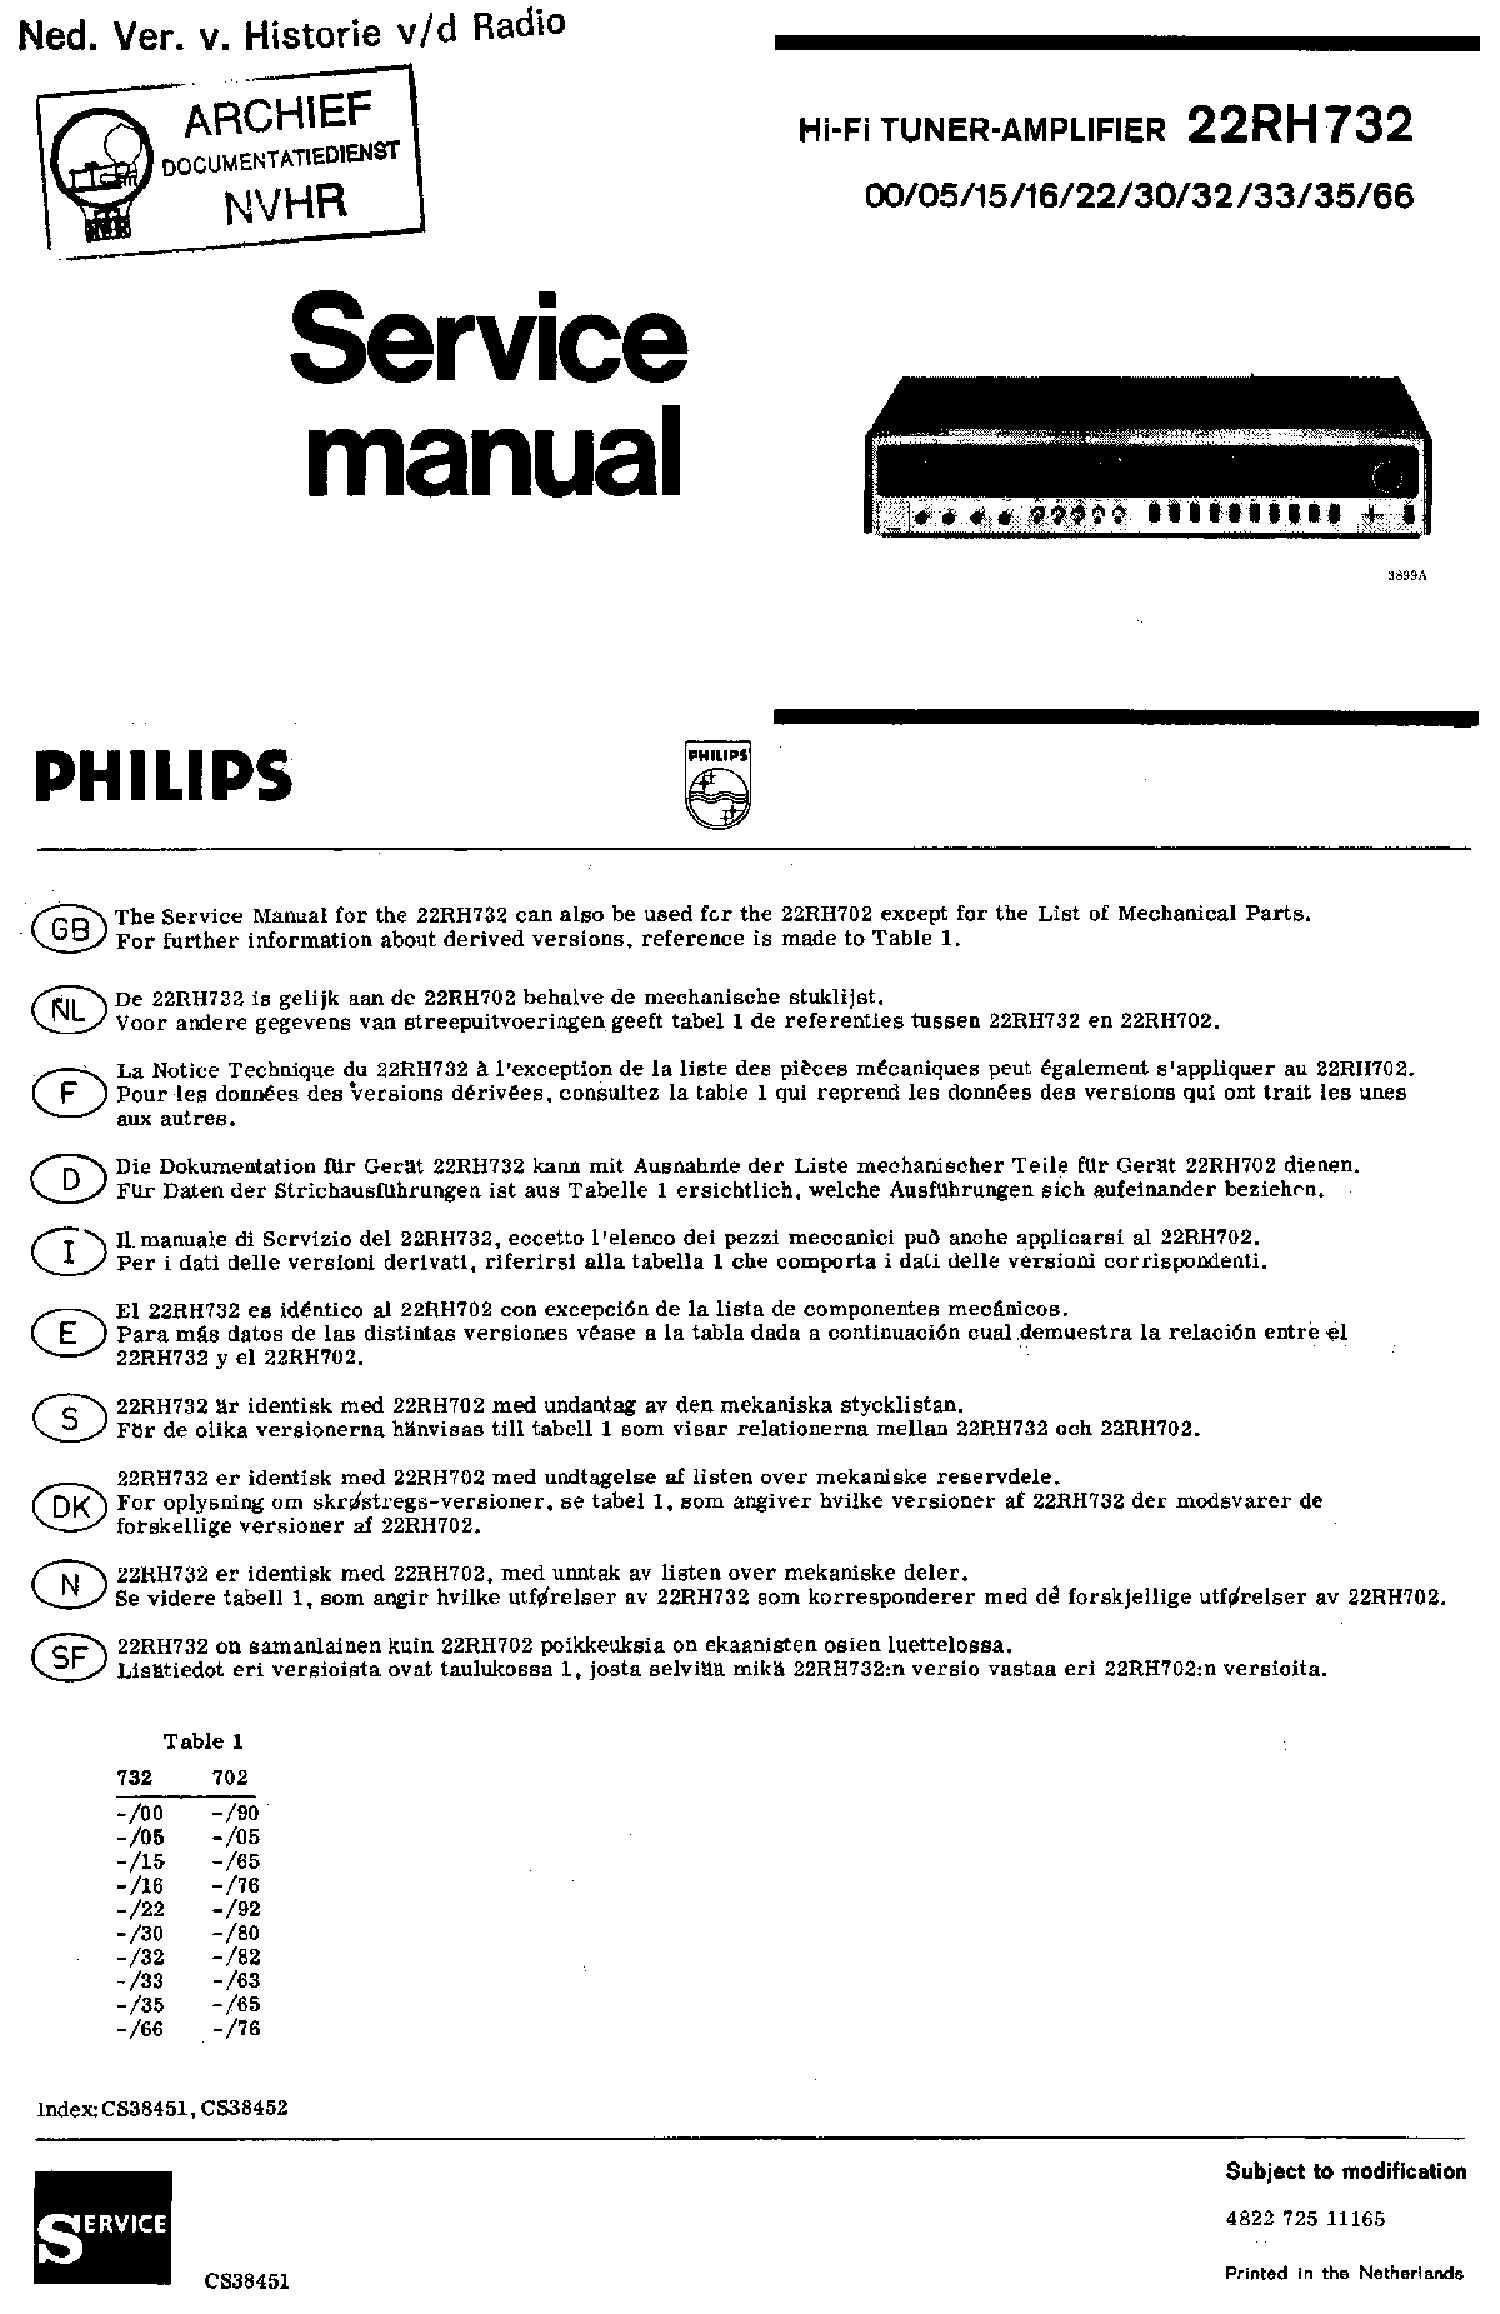 PHILIPS 22RH732-00-05-15-16-22-30-32-33-3566 HIFI TUNER-AMPLIFIER SM service manual (1st page)